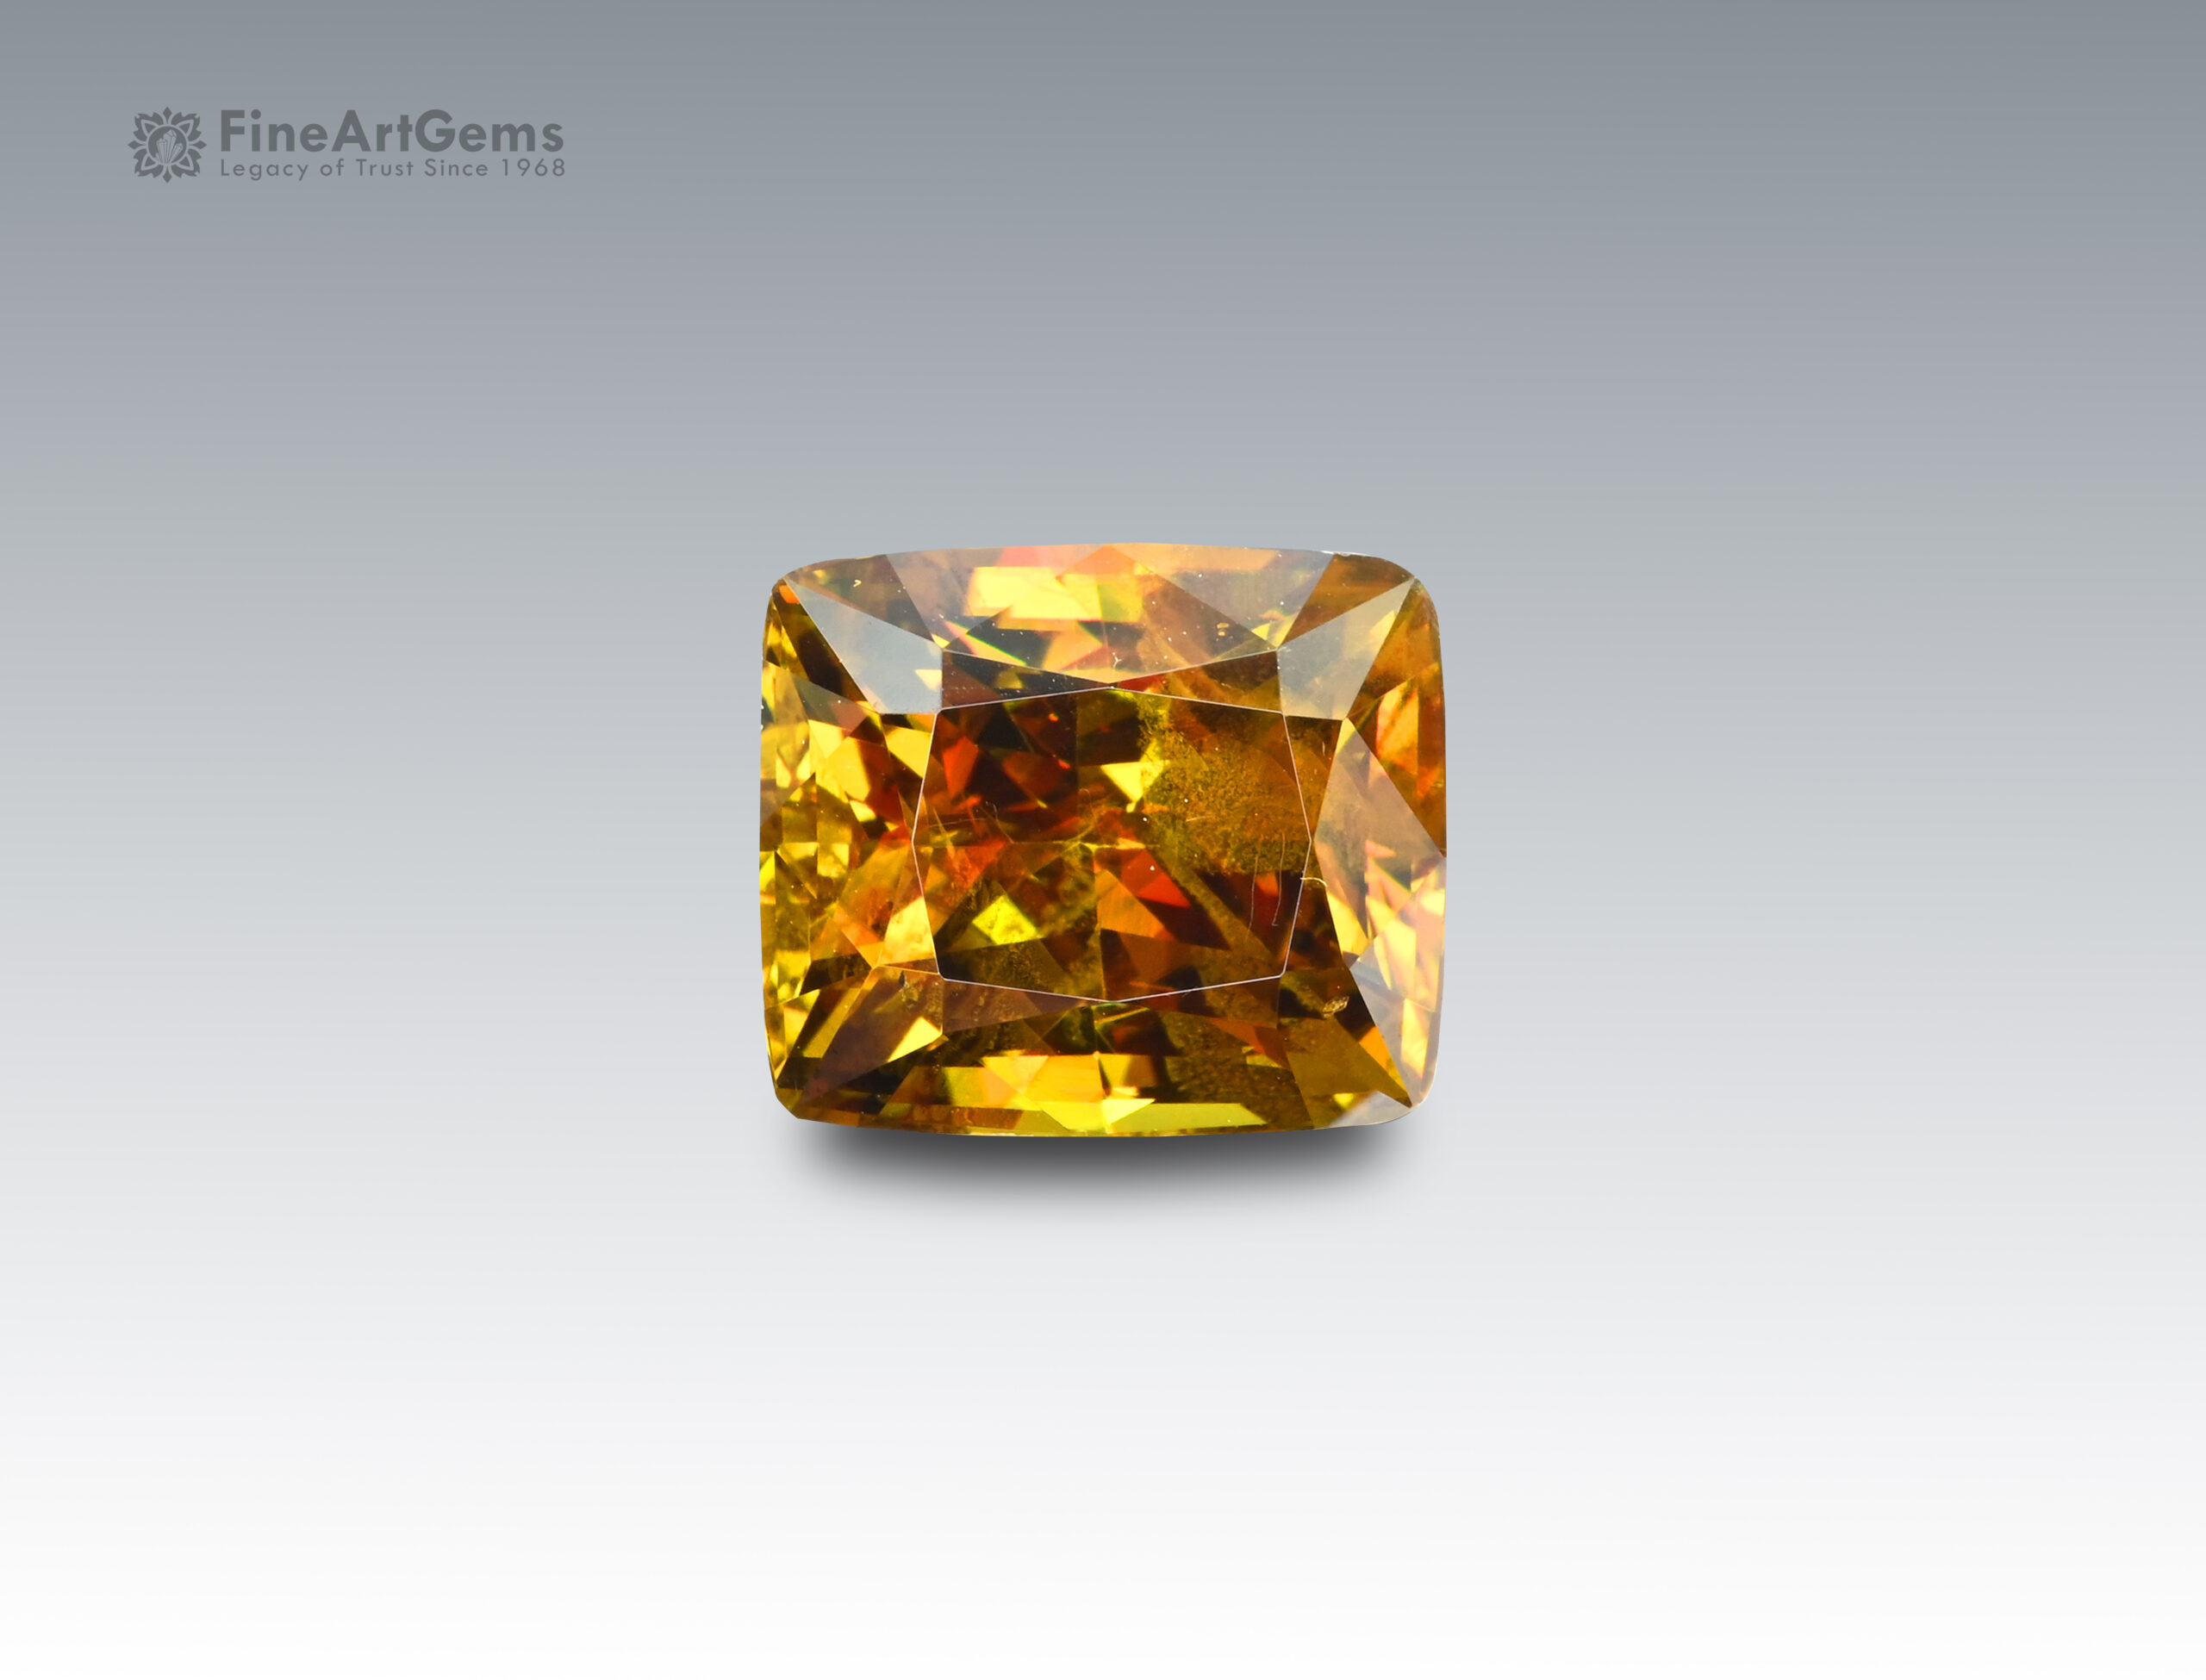 6.4 Carats Marvelous Yellow Sphene Gemstone in Cushion Cut Style